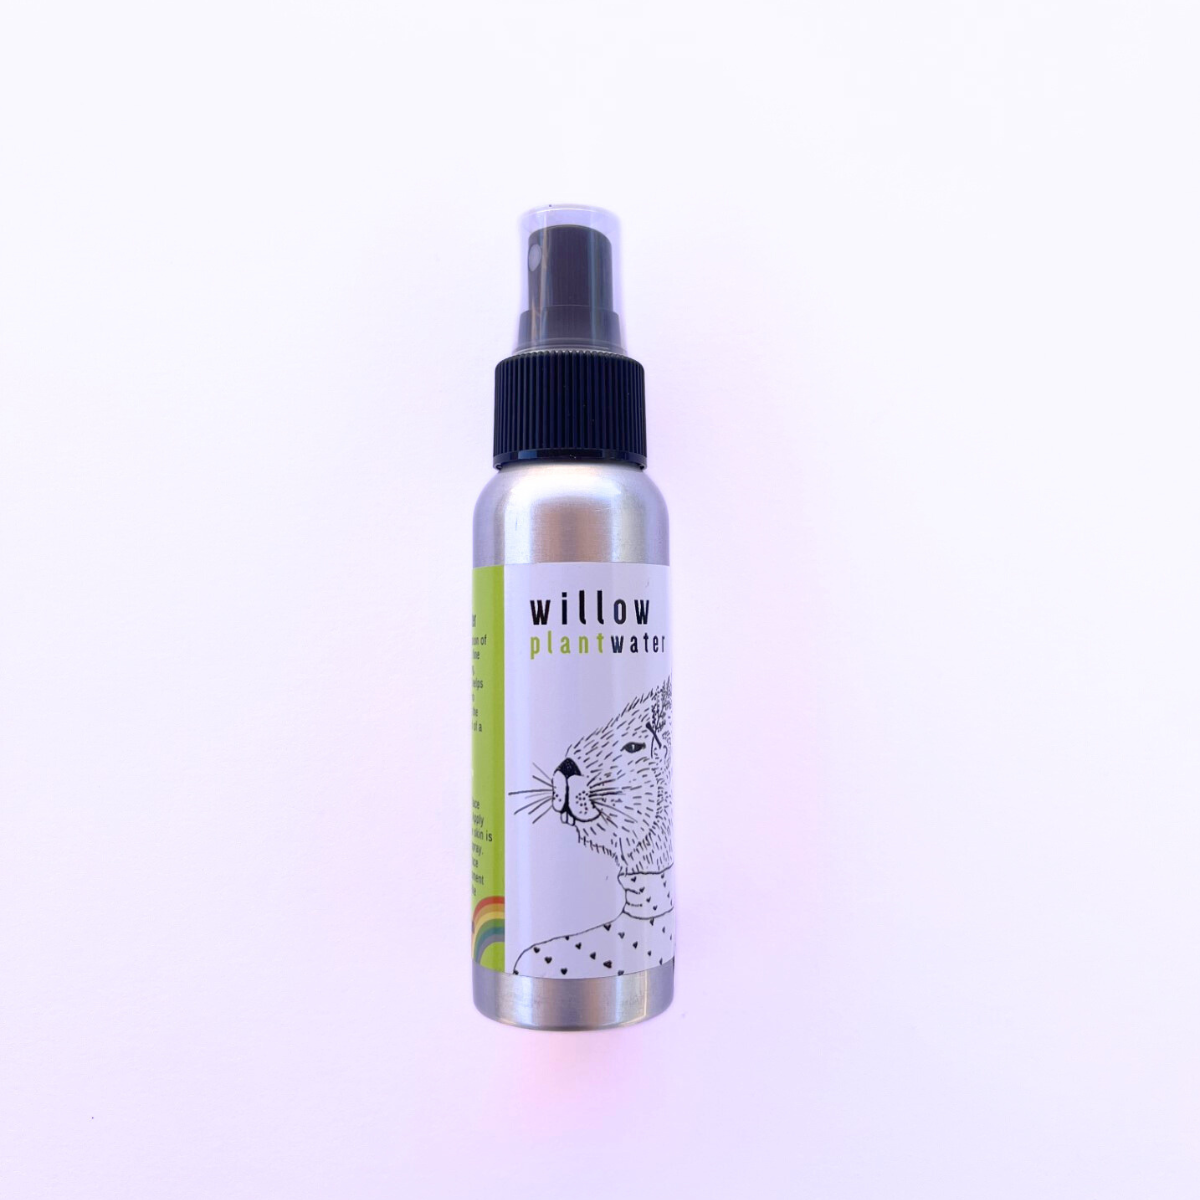 Willow Plantwater